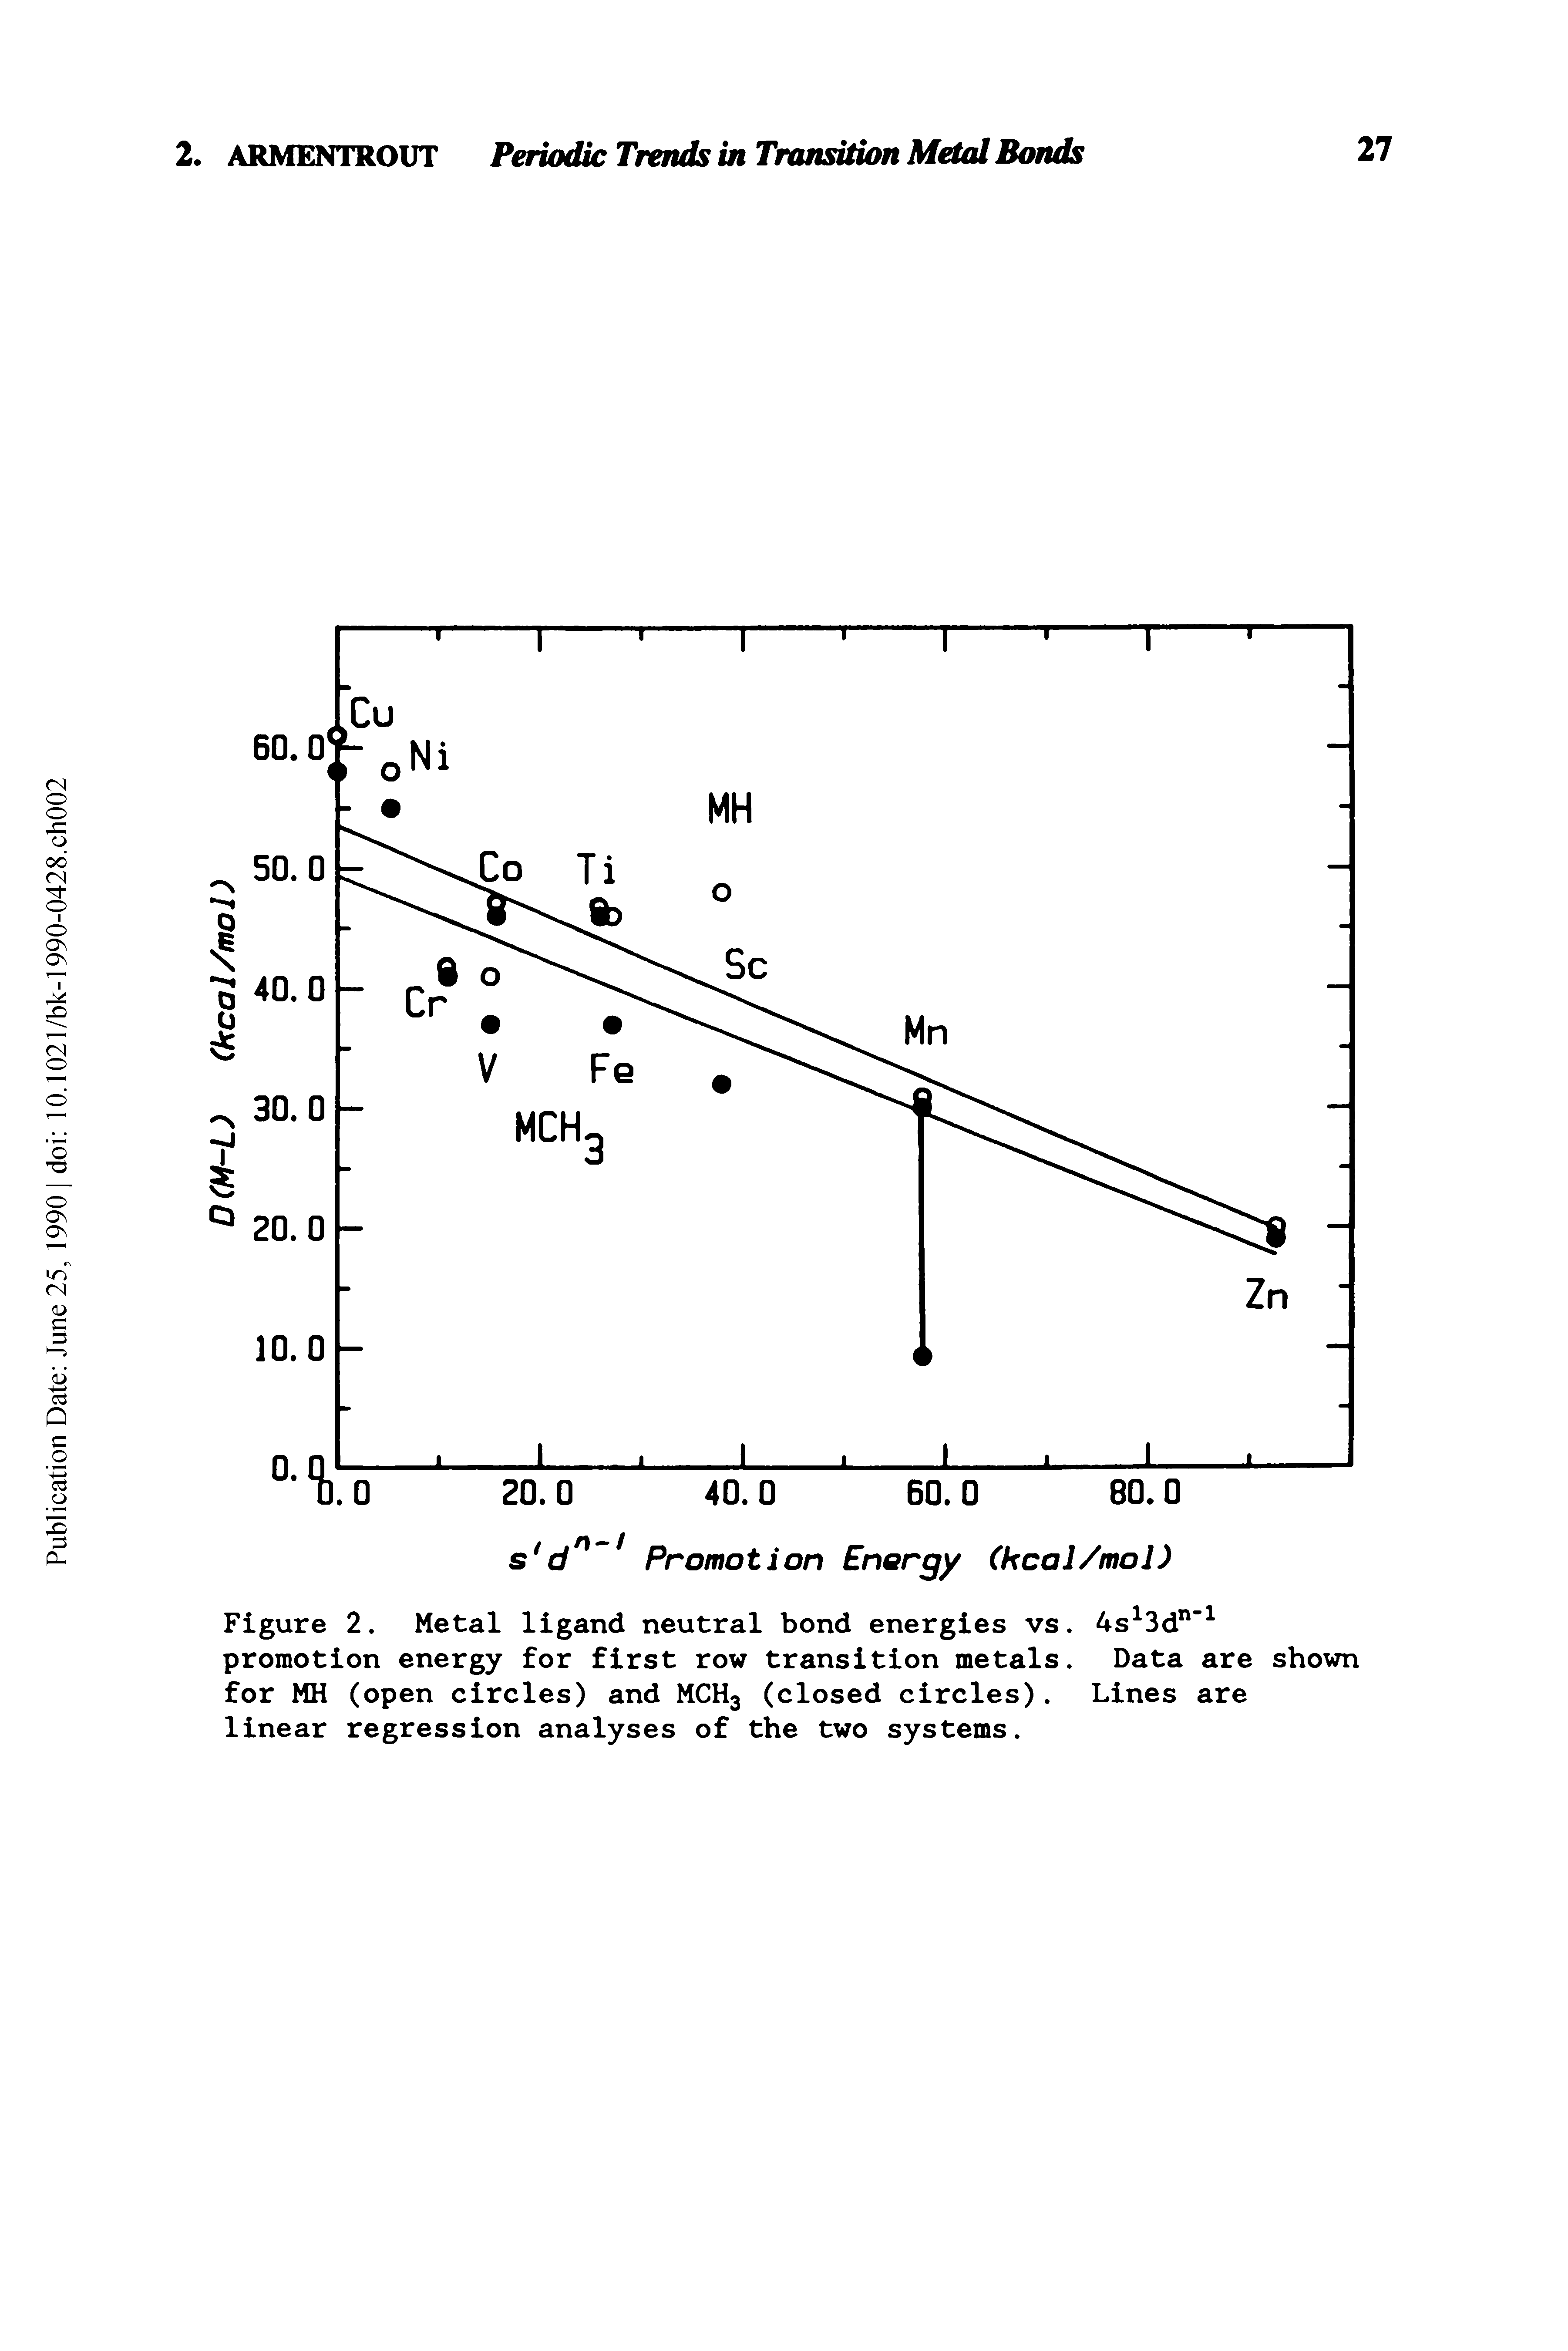 Figure 2. Metal ligand neutral bond energies vs. 4s 3d promotion energy for first row transition metals. Data are shown for MH (open circles) and MCH3 (closed circles). Lines are linear regression analyses of the two systems.